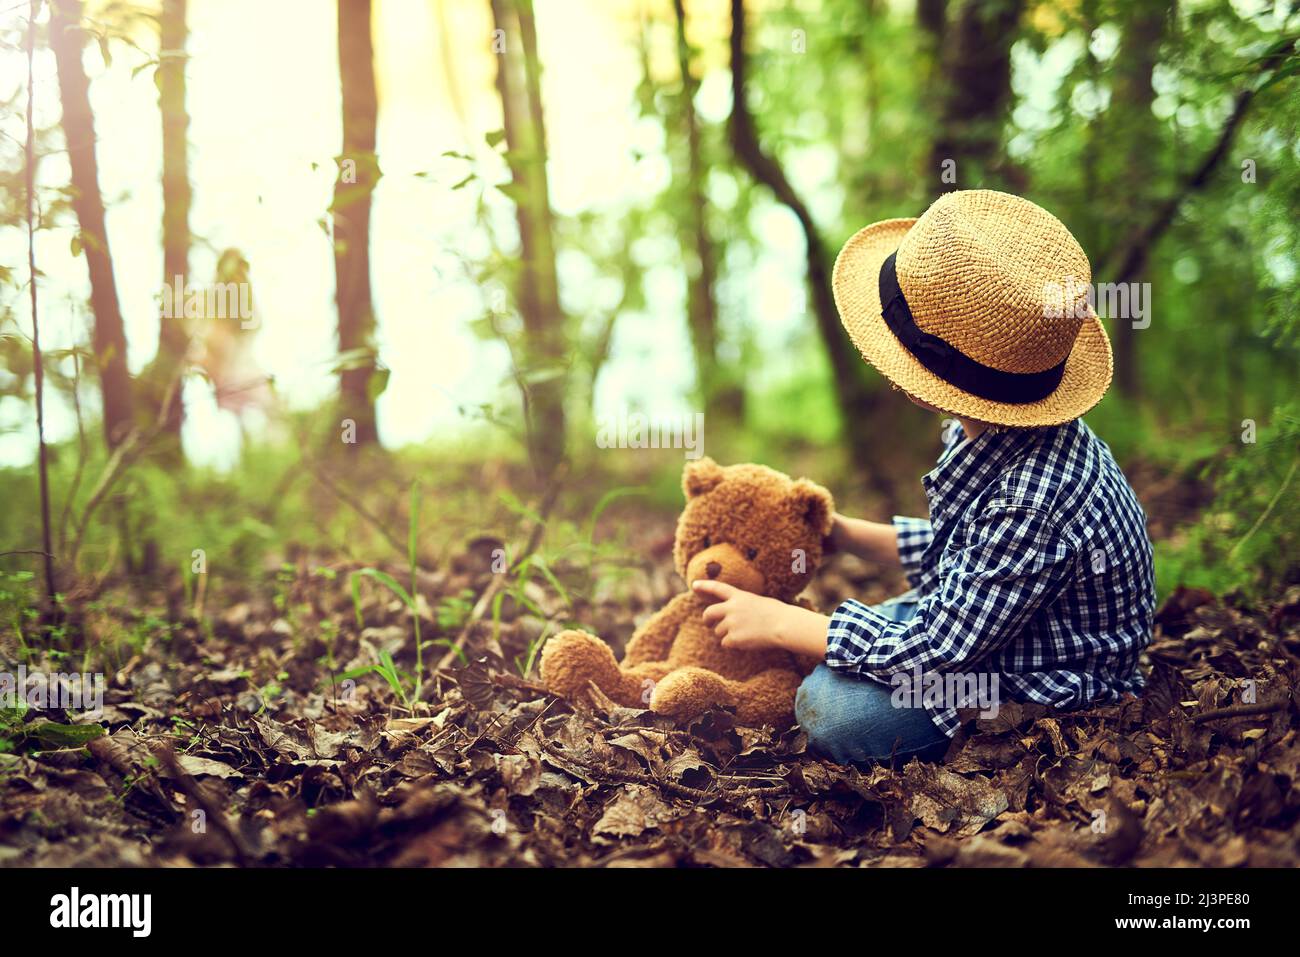 Shh Teddy, I heard something. Shot of a little boy sitting in the forest with his teddy bear. Stock Photo